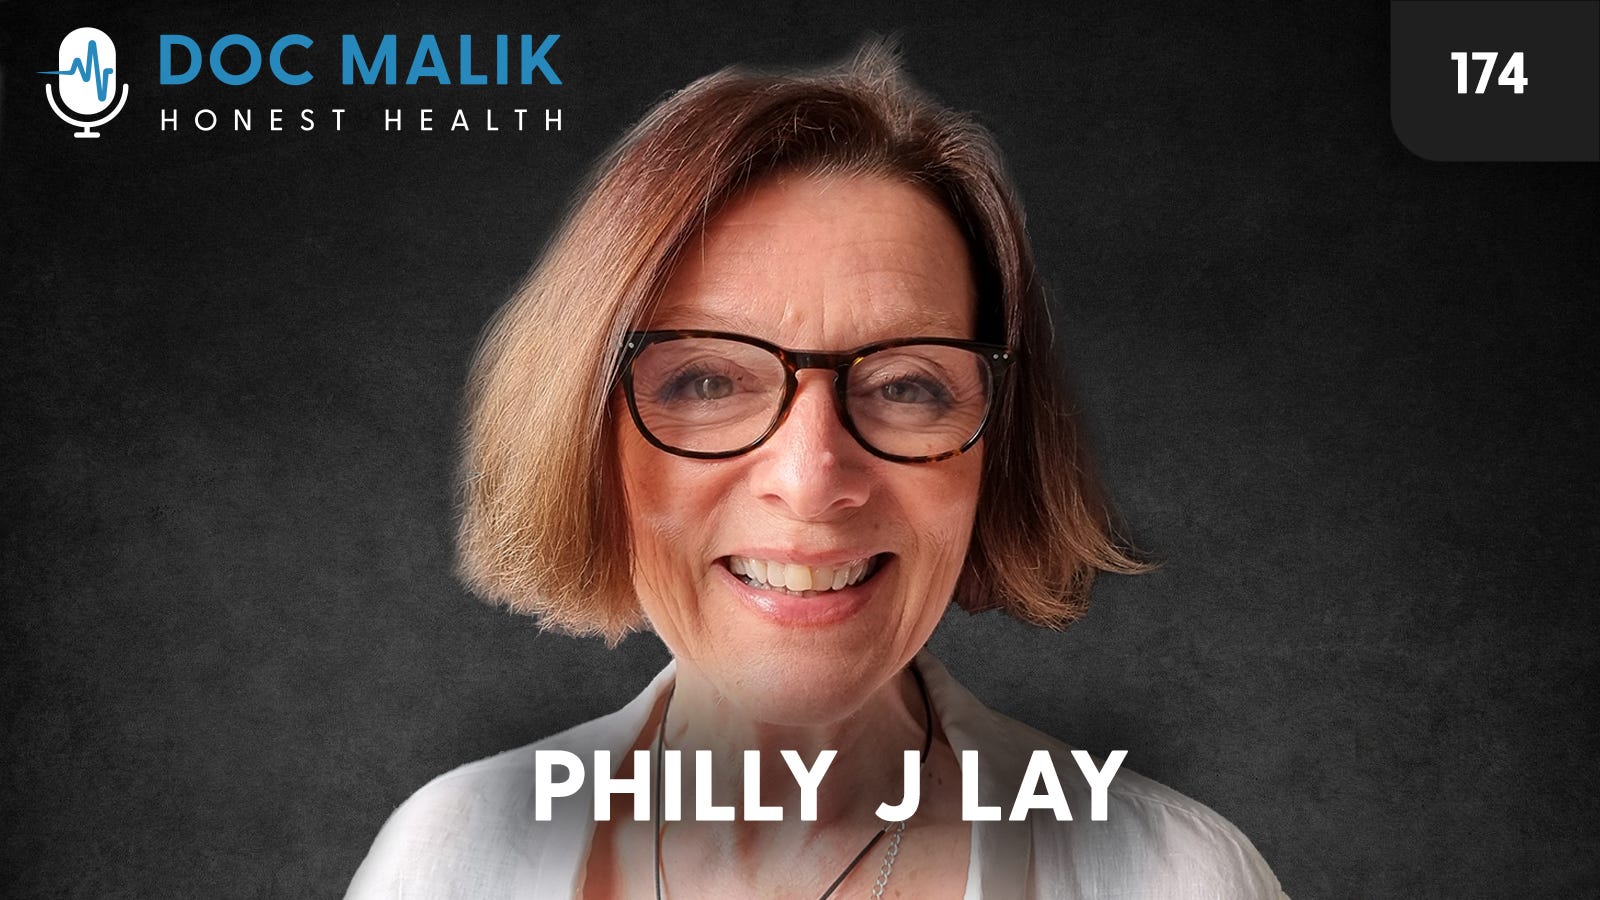 #174 - Philly J Lay Discusses Cancer And The Upcoming Barbara O'Neill Visit To London